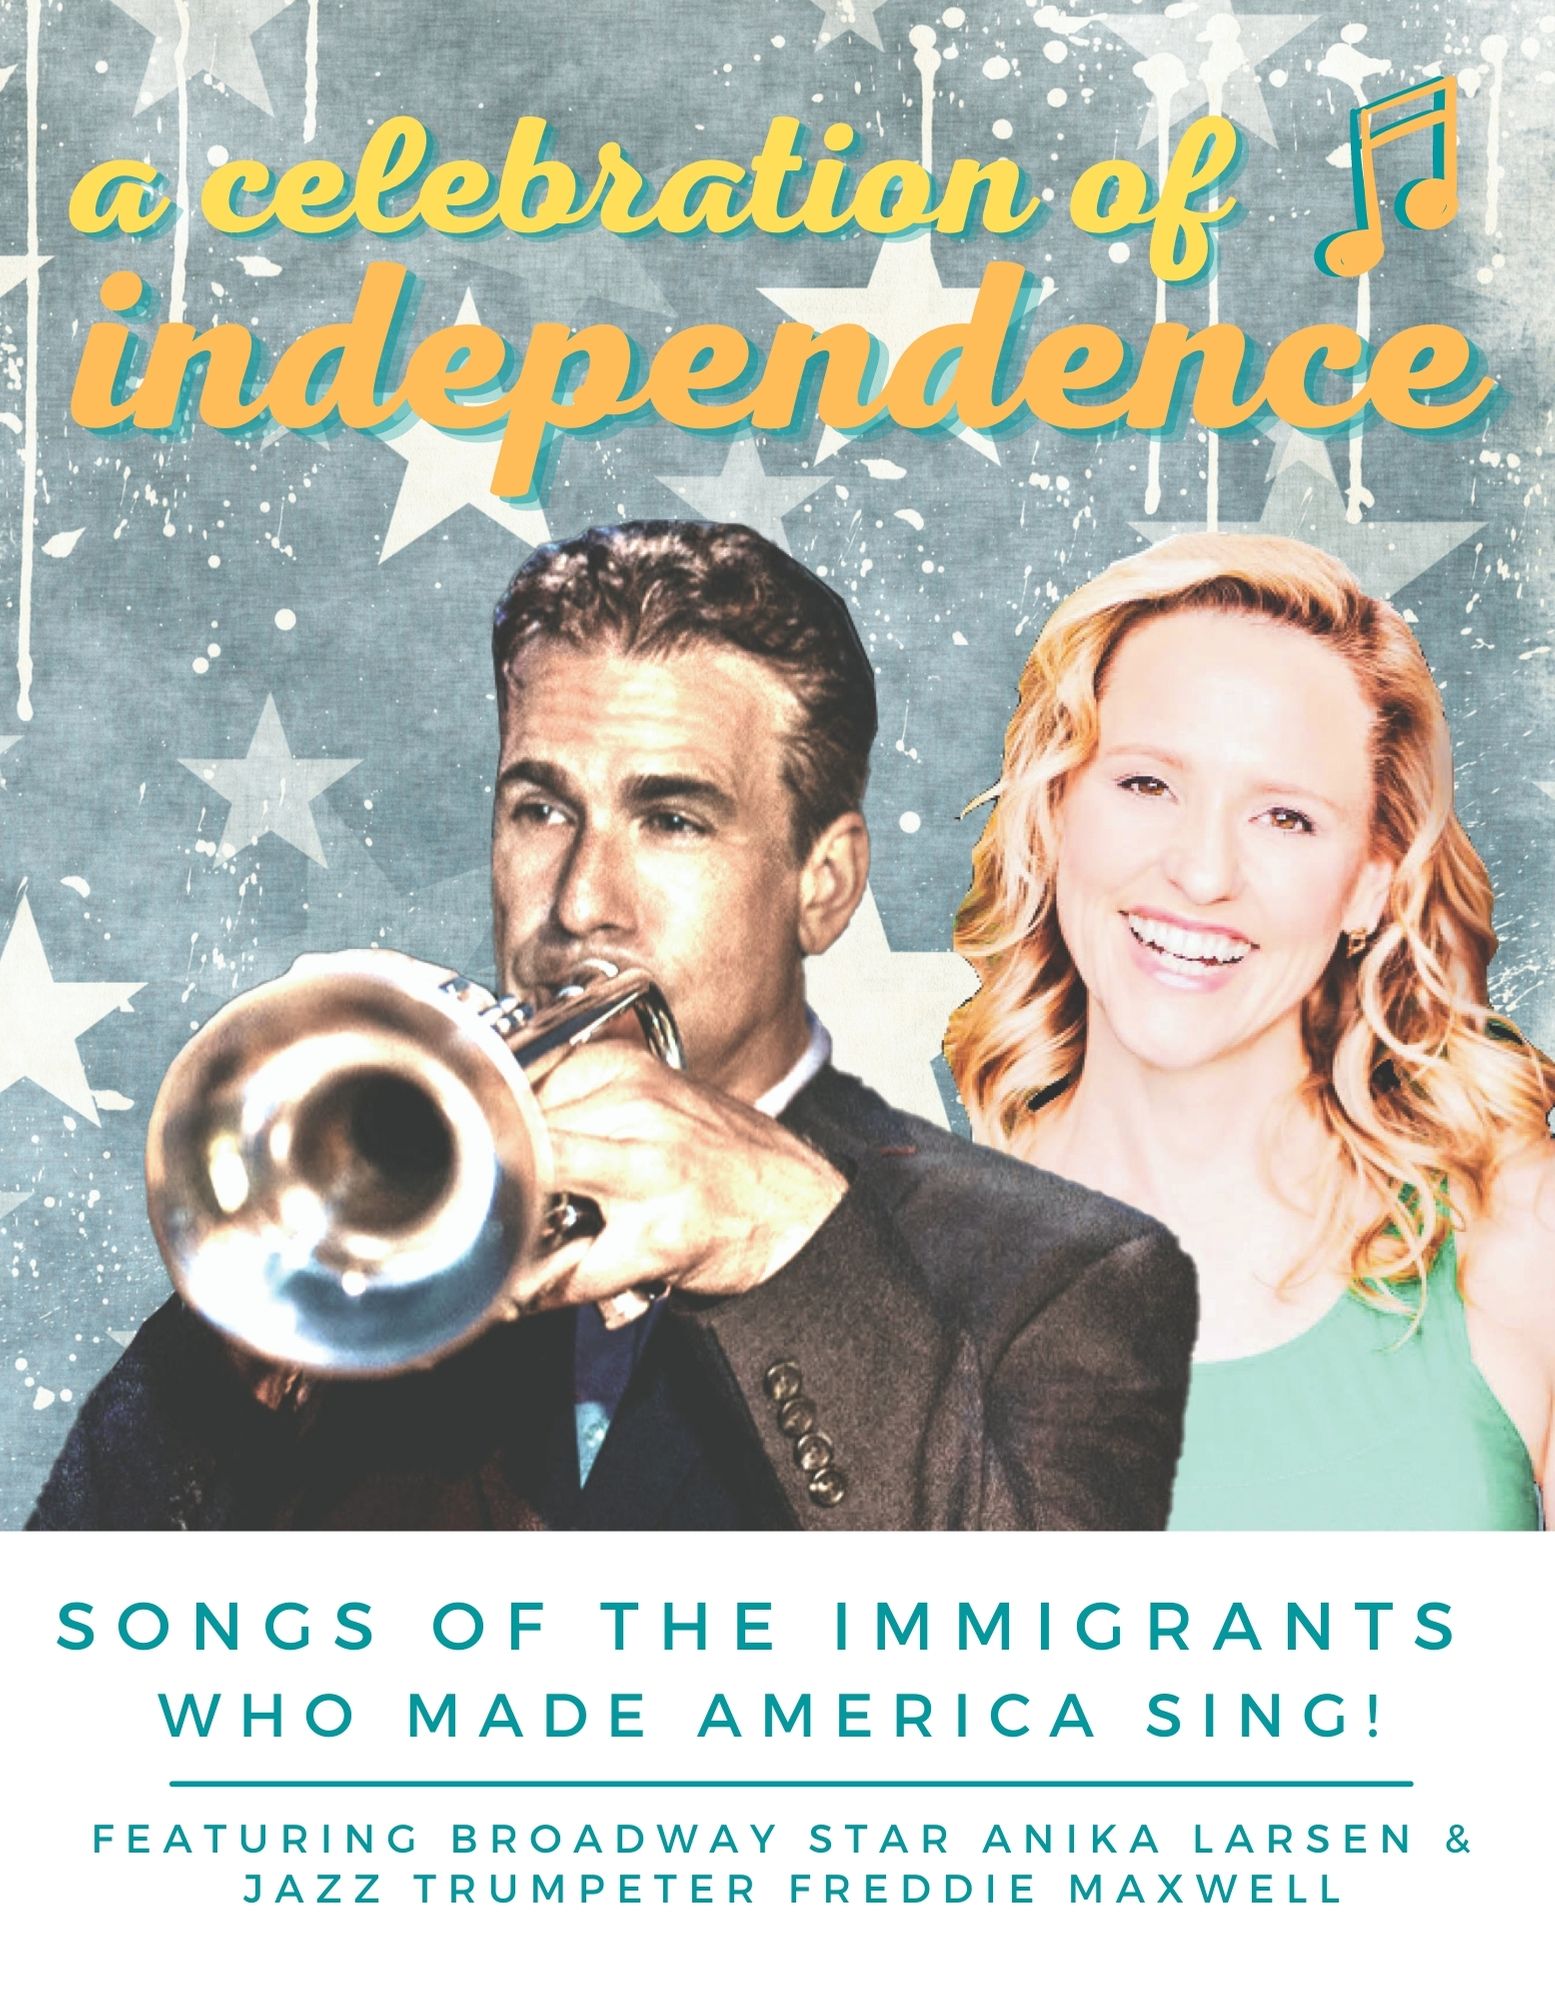 Drama Desk Winner & Tony-nominee Broadway star ANIKA LARSEN (Beautiful: The Carole King Musical, Avenue Q, Xanadu, Rent, All Shook Up) & trumpeter FREDDIE MAXWELL (Larsen/Maxwell Quintet) team up for a concert of jazz, pop, Latin and Broadway tunes to mark to celebrate the creative spirit of the immigrants who created American music and benefit the programs of The Studios of Key West.